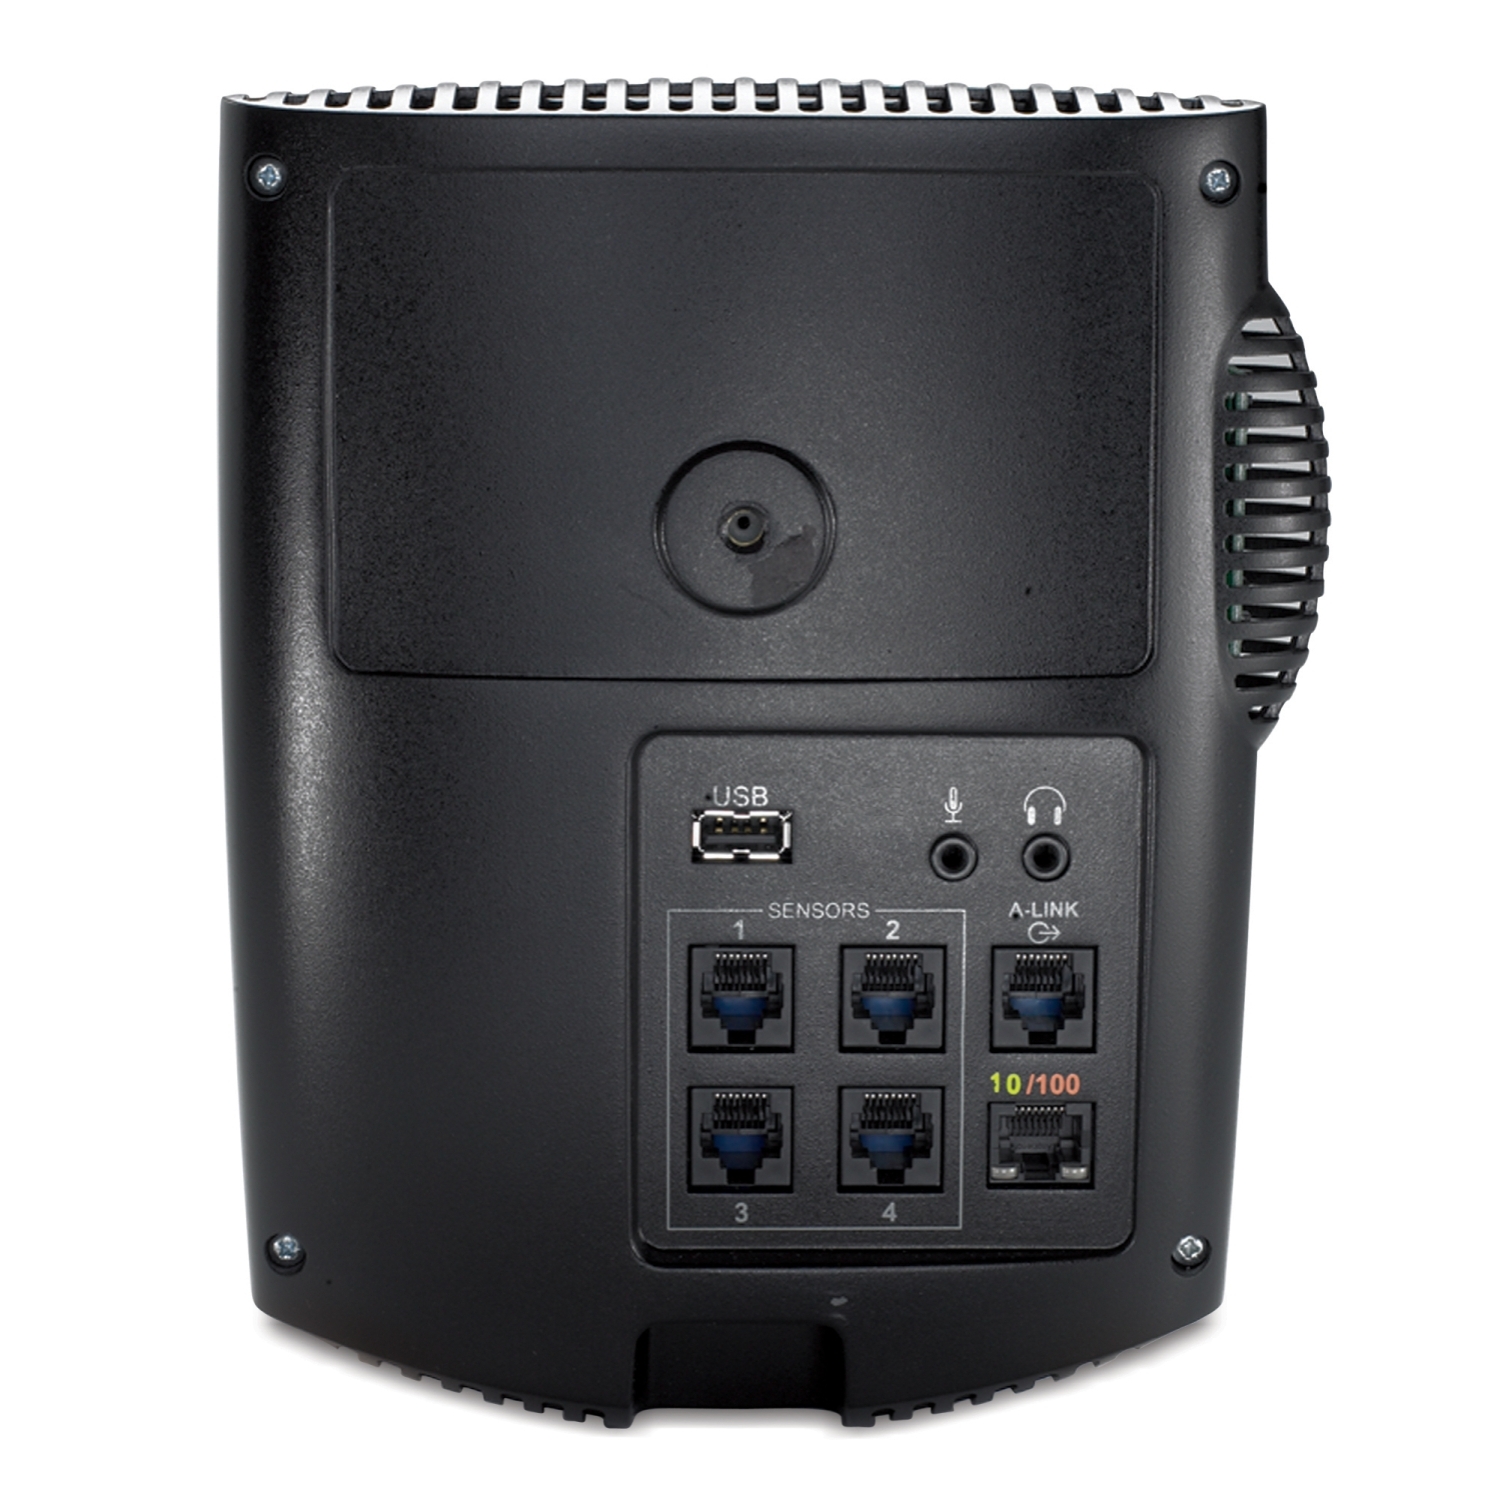 NetBotz Room Monitor 455 (without PoE Injector) - NBWL0455 | APC USA